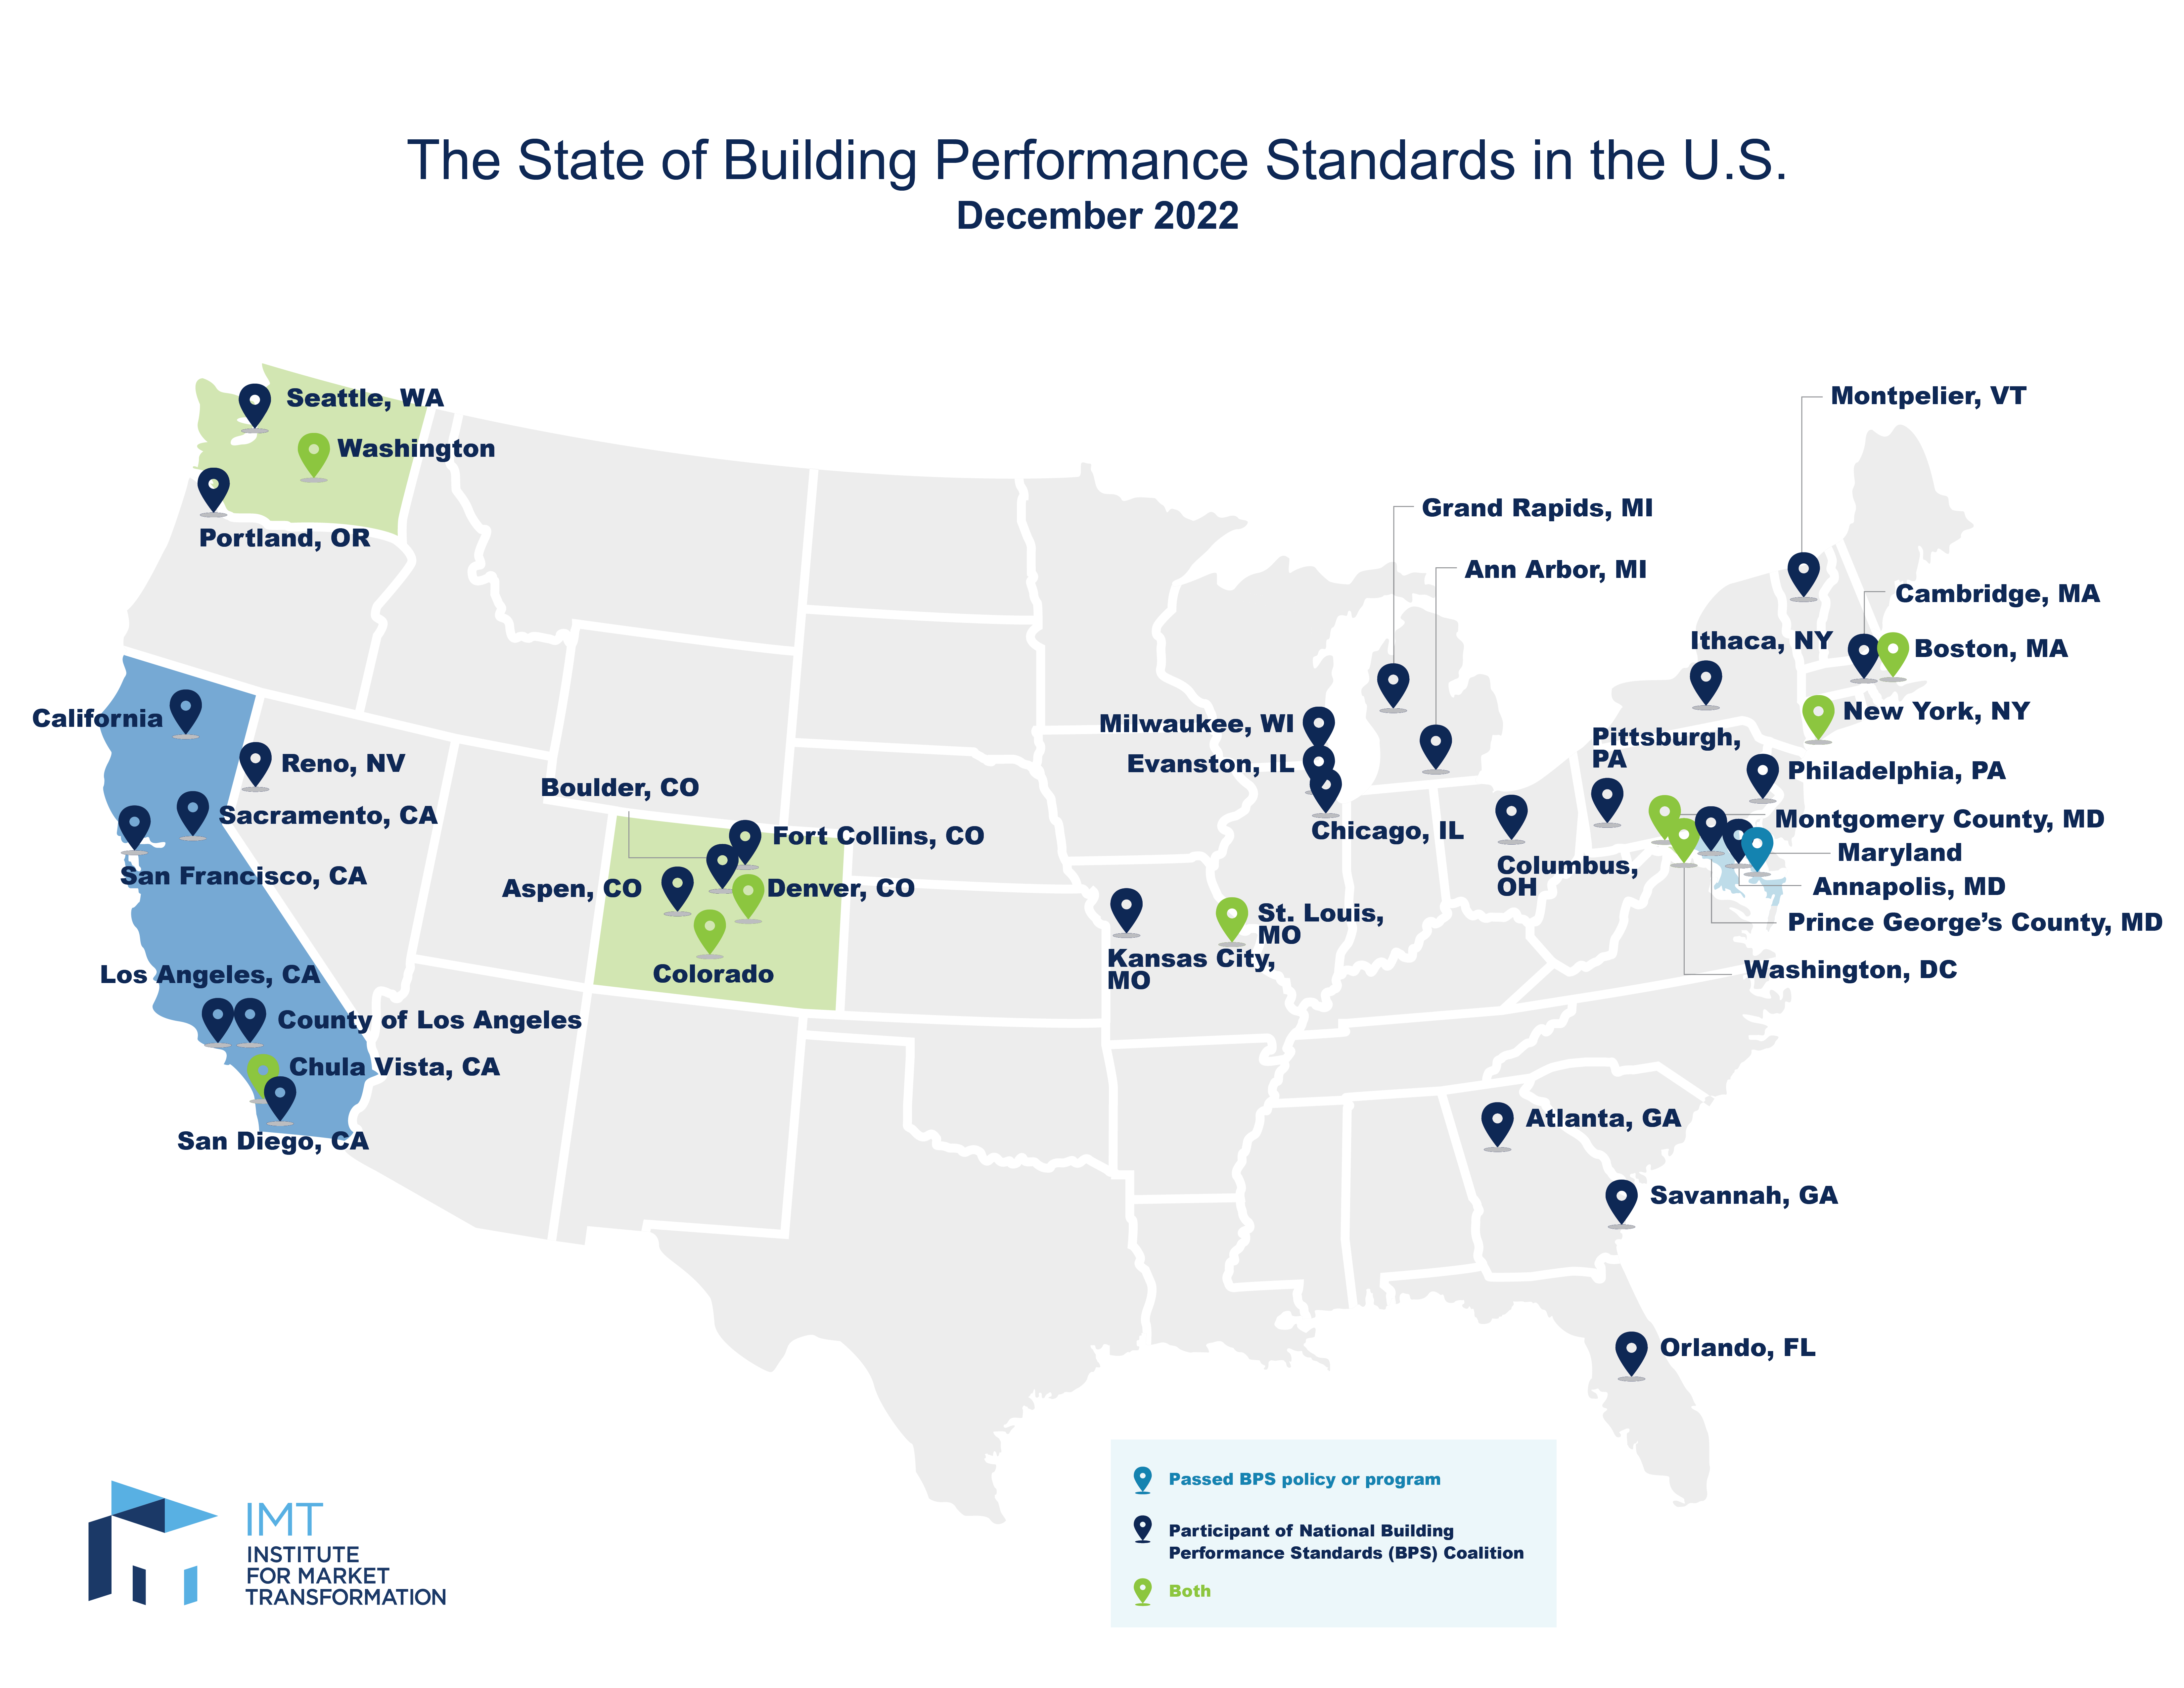 The State of Building Performance Standards in the U.S. as of December 2022. A map showing all of the jurisdictions (38 cities, counties and states) who have committed to passing BPS by Aril 2024.